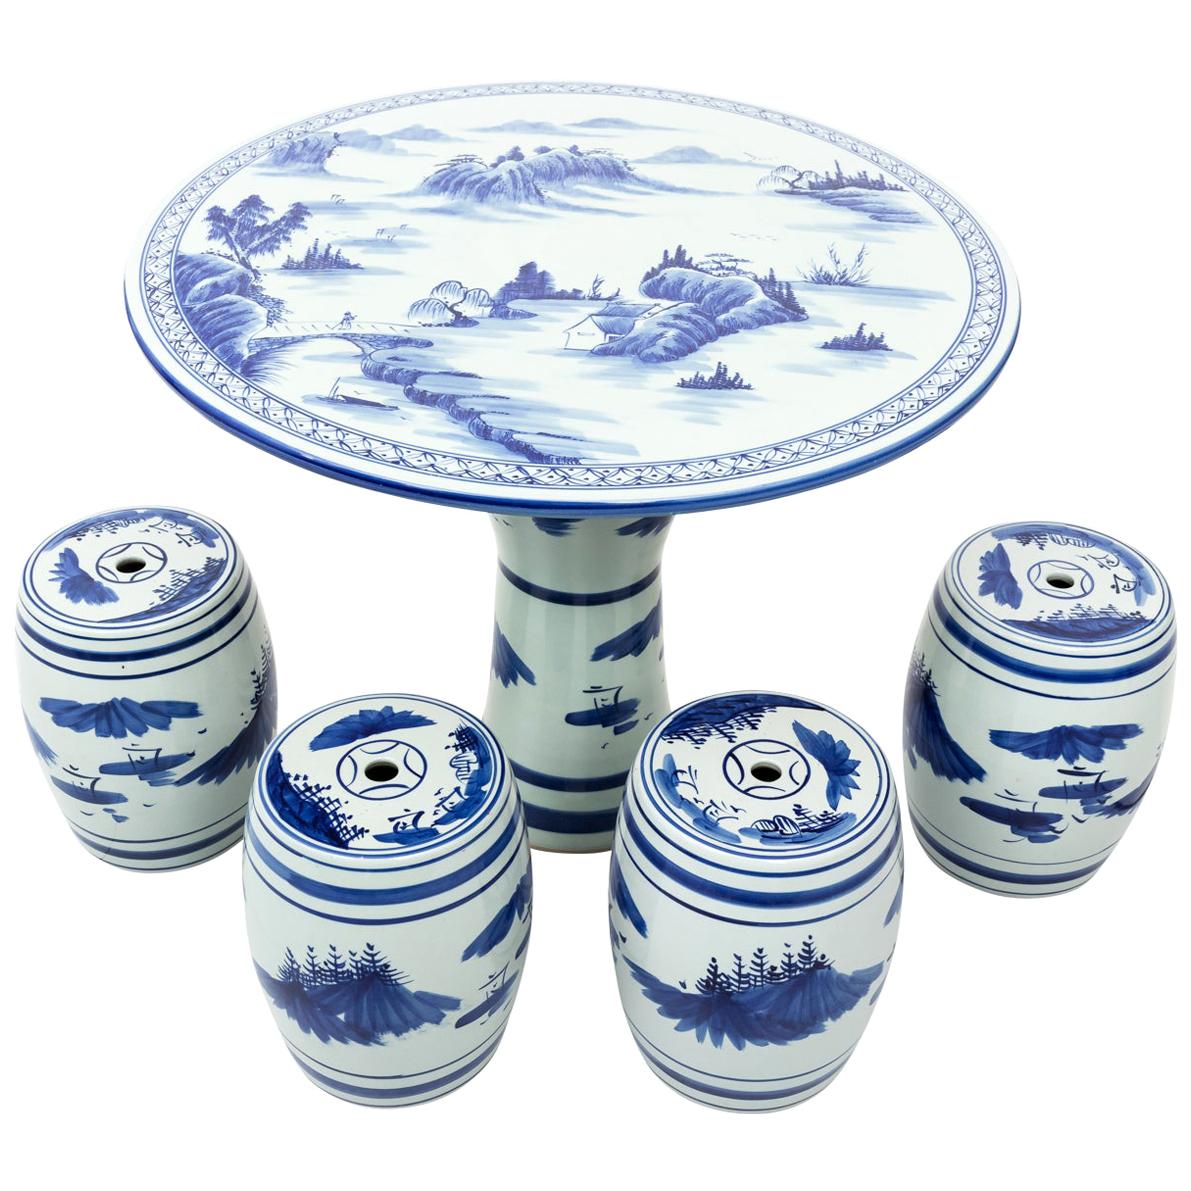 Chinese Blue and White Porcelain Garden Table with Flour Stools